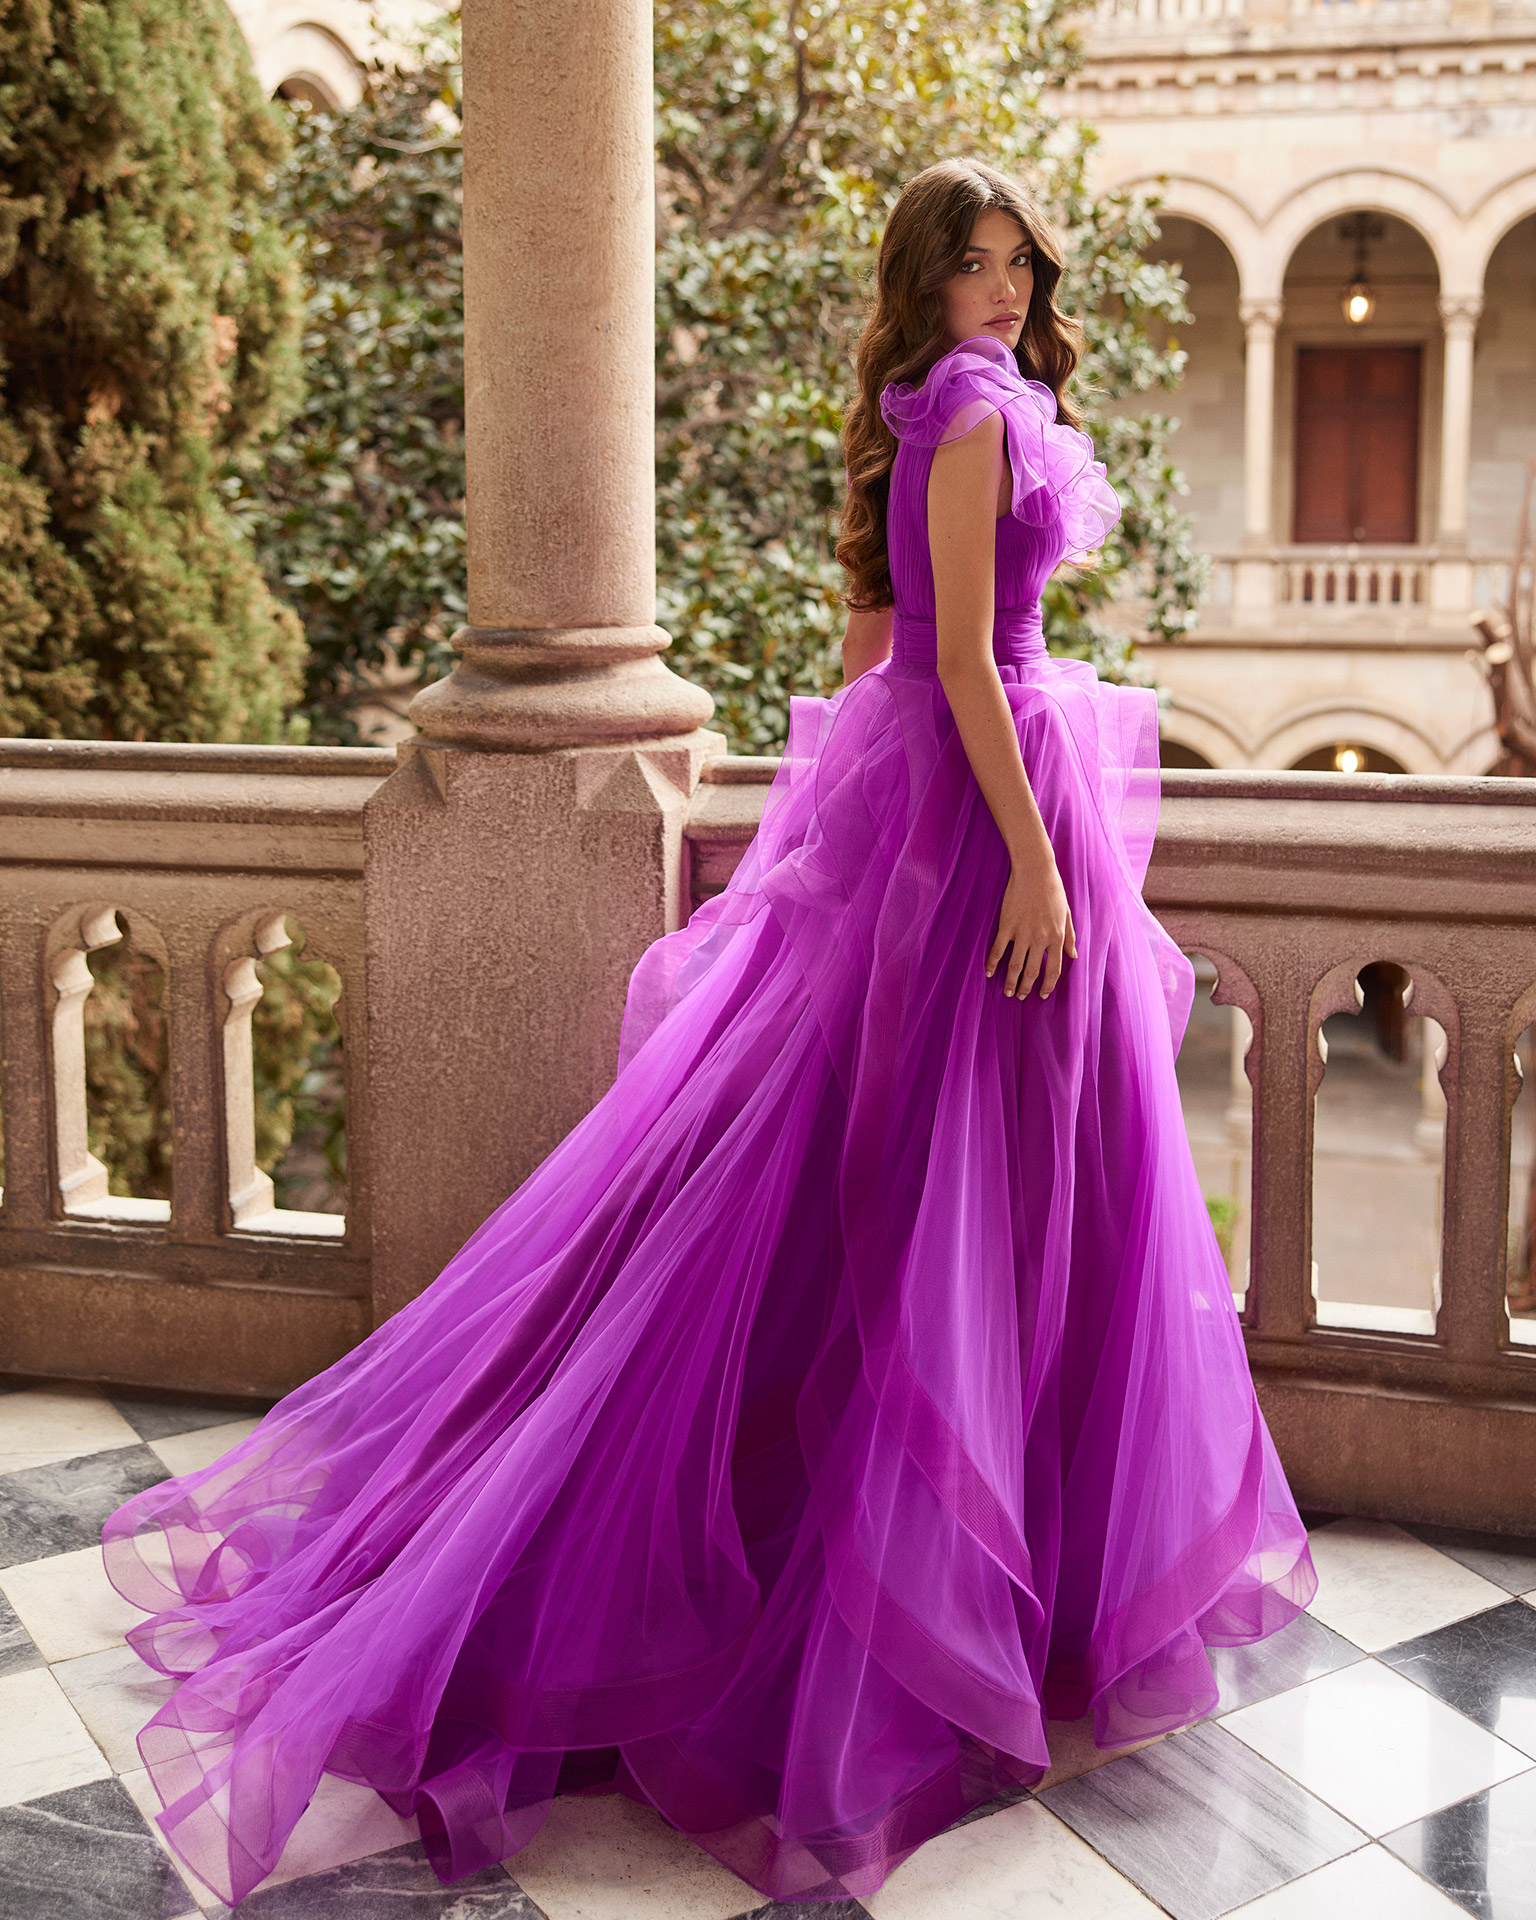 Long evening dress made of tulle. Marfil Barcelona design with a V-neckline, and flounces on the skirt and neckline. MARFIL_BARCELONA.